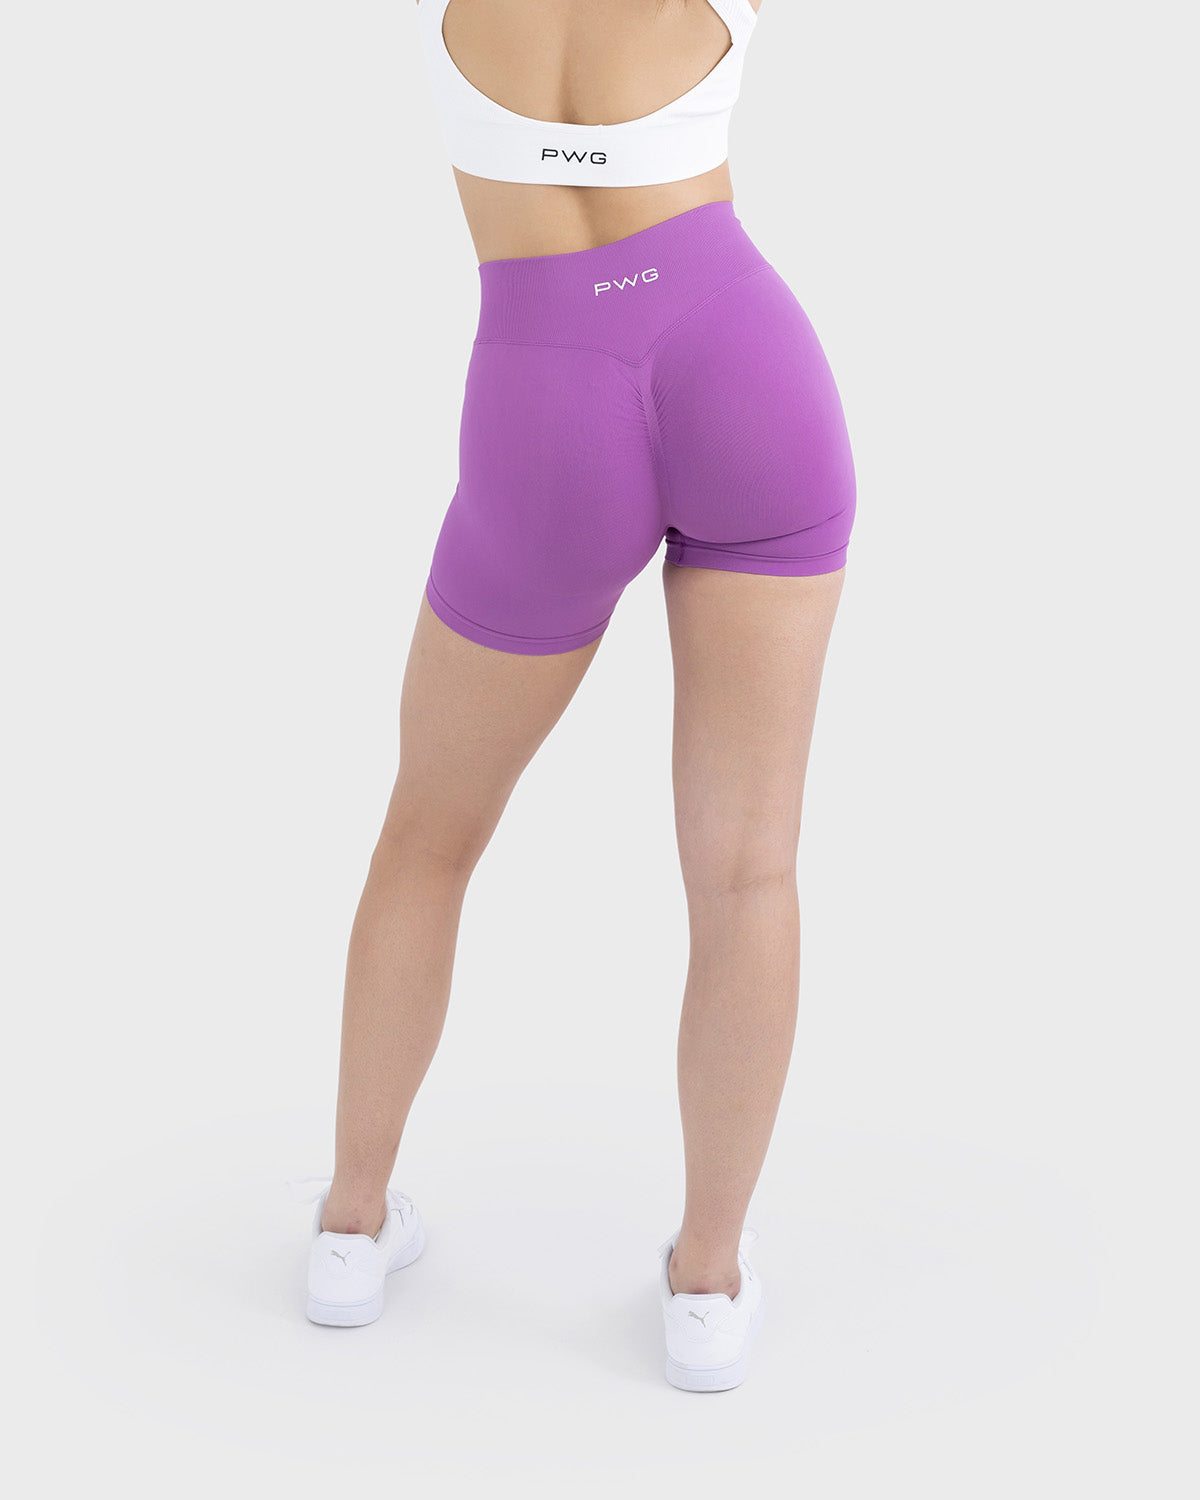 Form Sculpting Shorts - Radiant Berry